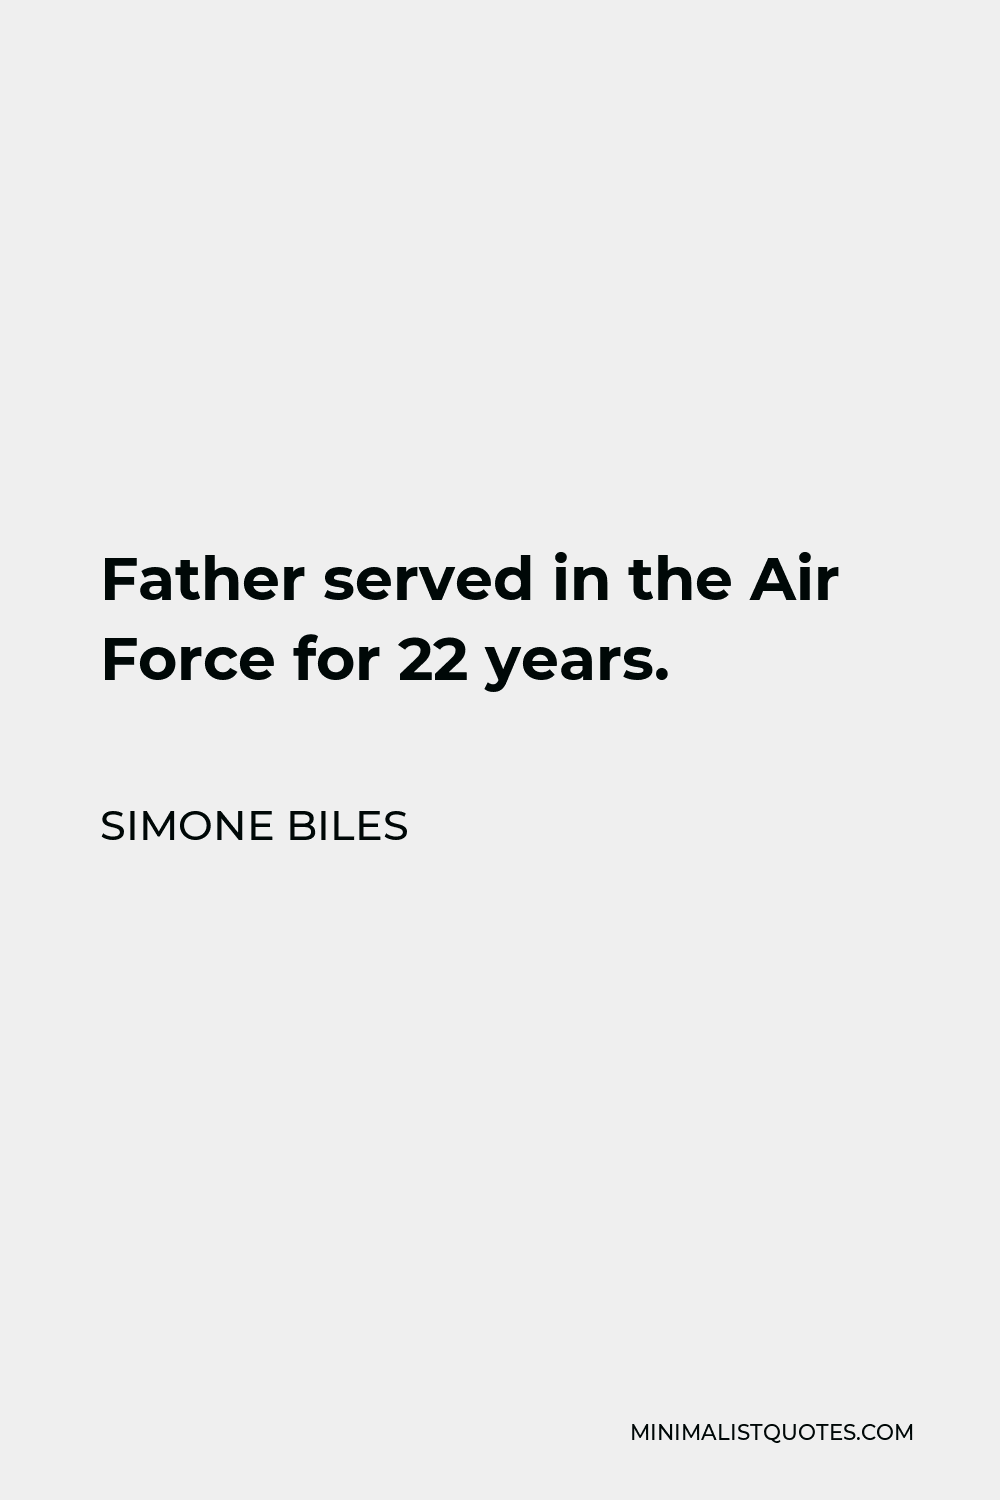 Simone Biles Quote - Father served in the Air Force for 22 years.